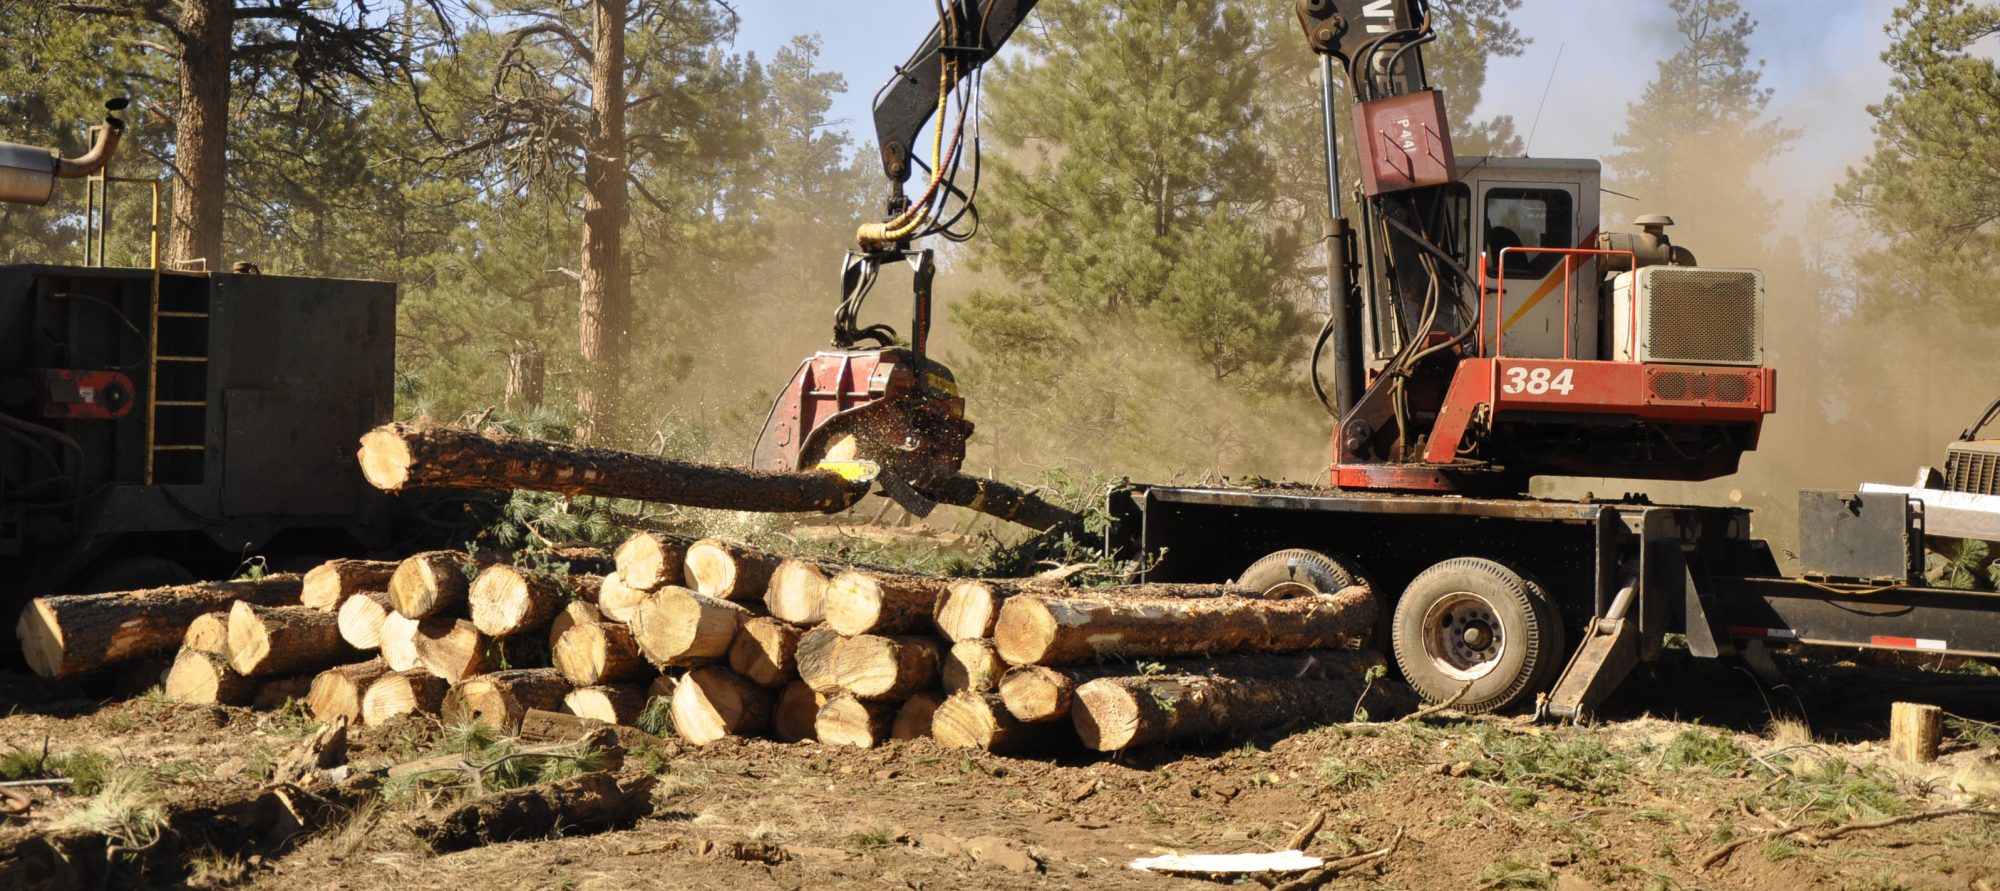 A forest harvester cuts and stacks logs for the White Mountain Stewardship Project in Arizona.